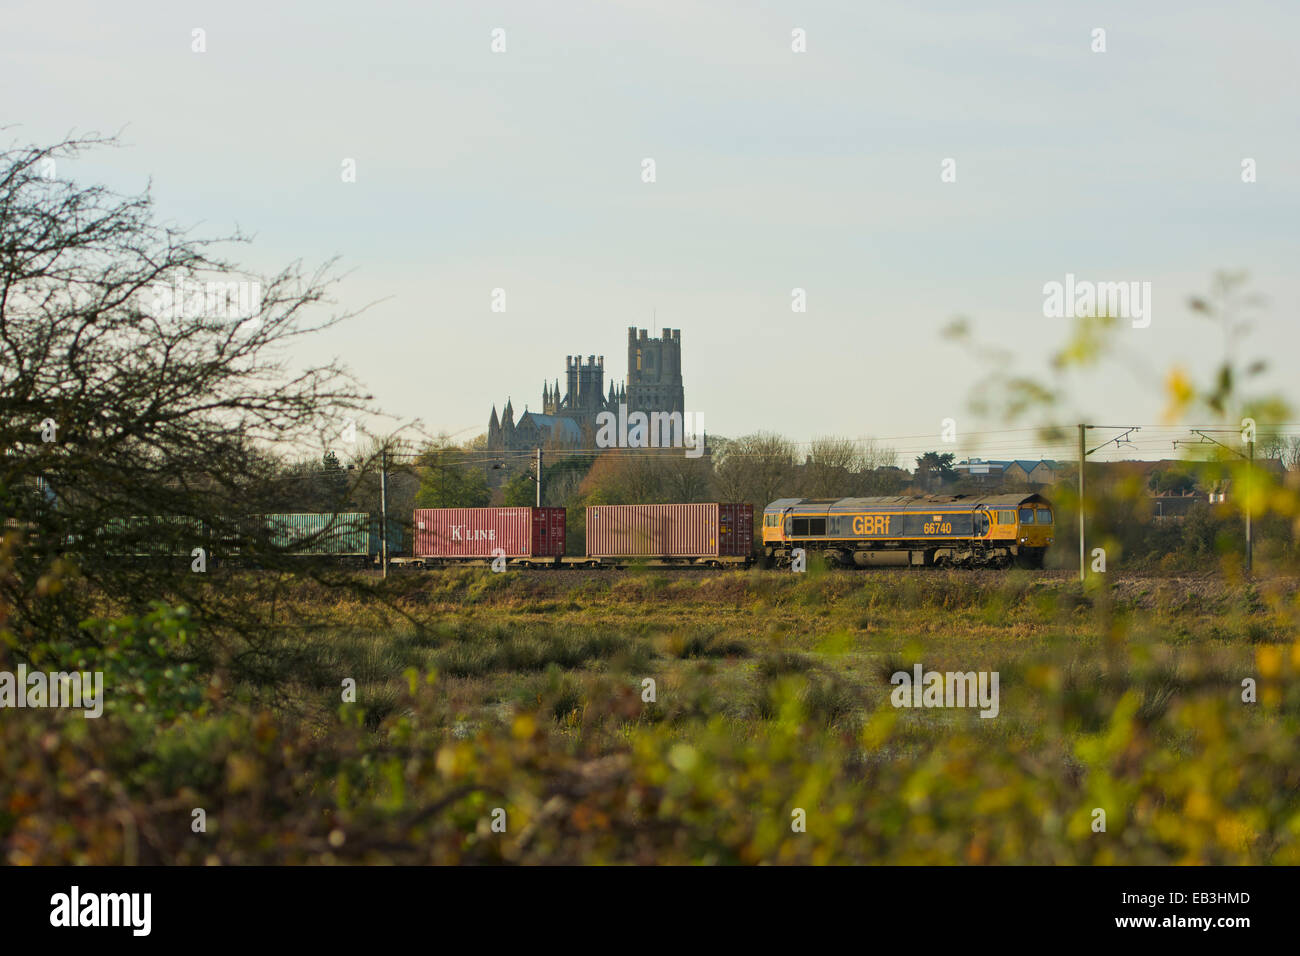 GBRf freight container train passing Ely Cathedral Stock Photo